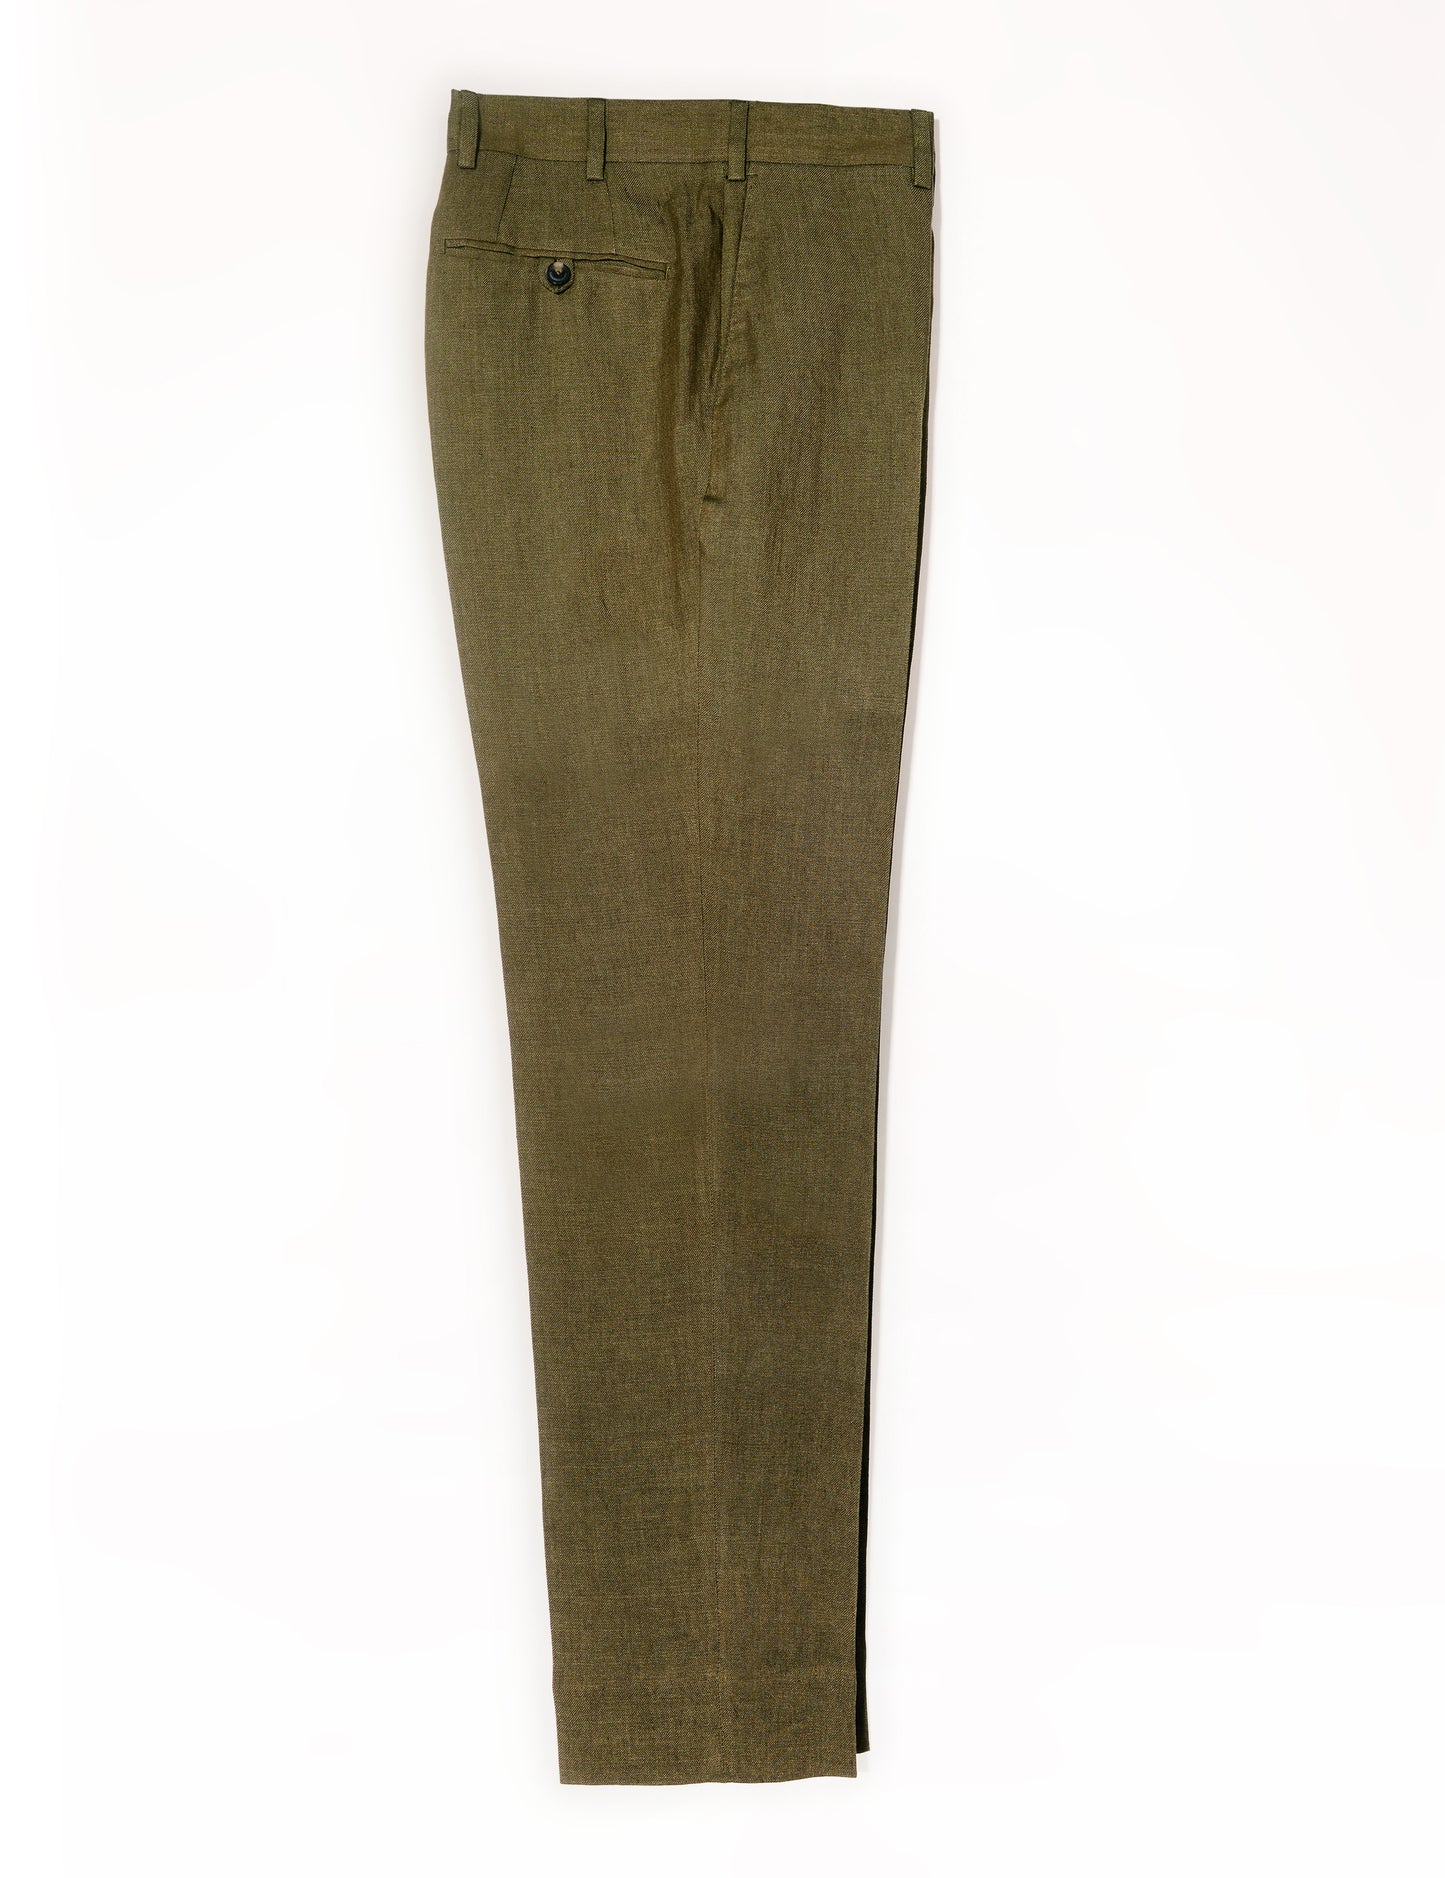 BKT50 Tailored Trousers in Linen Twill - Moss